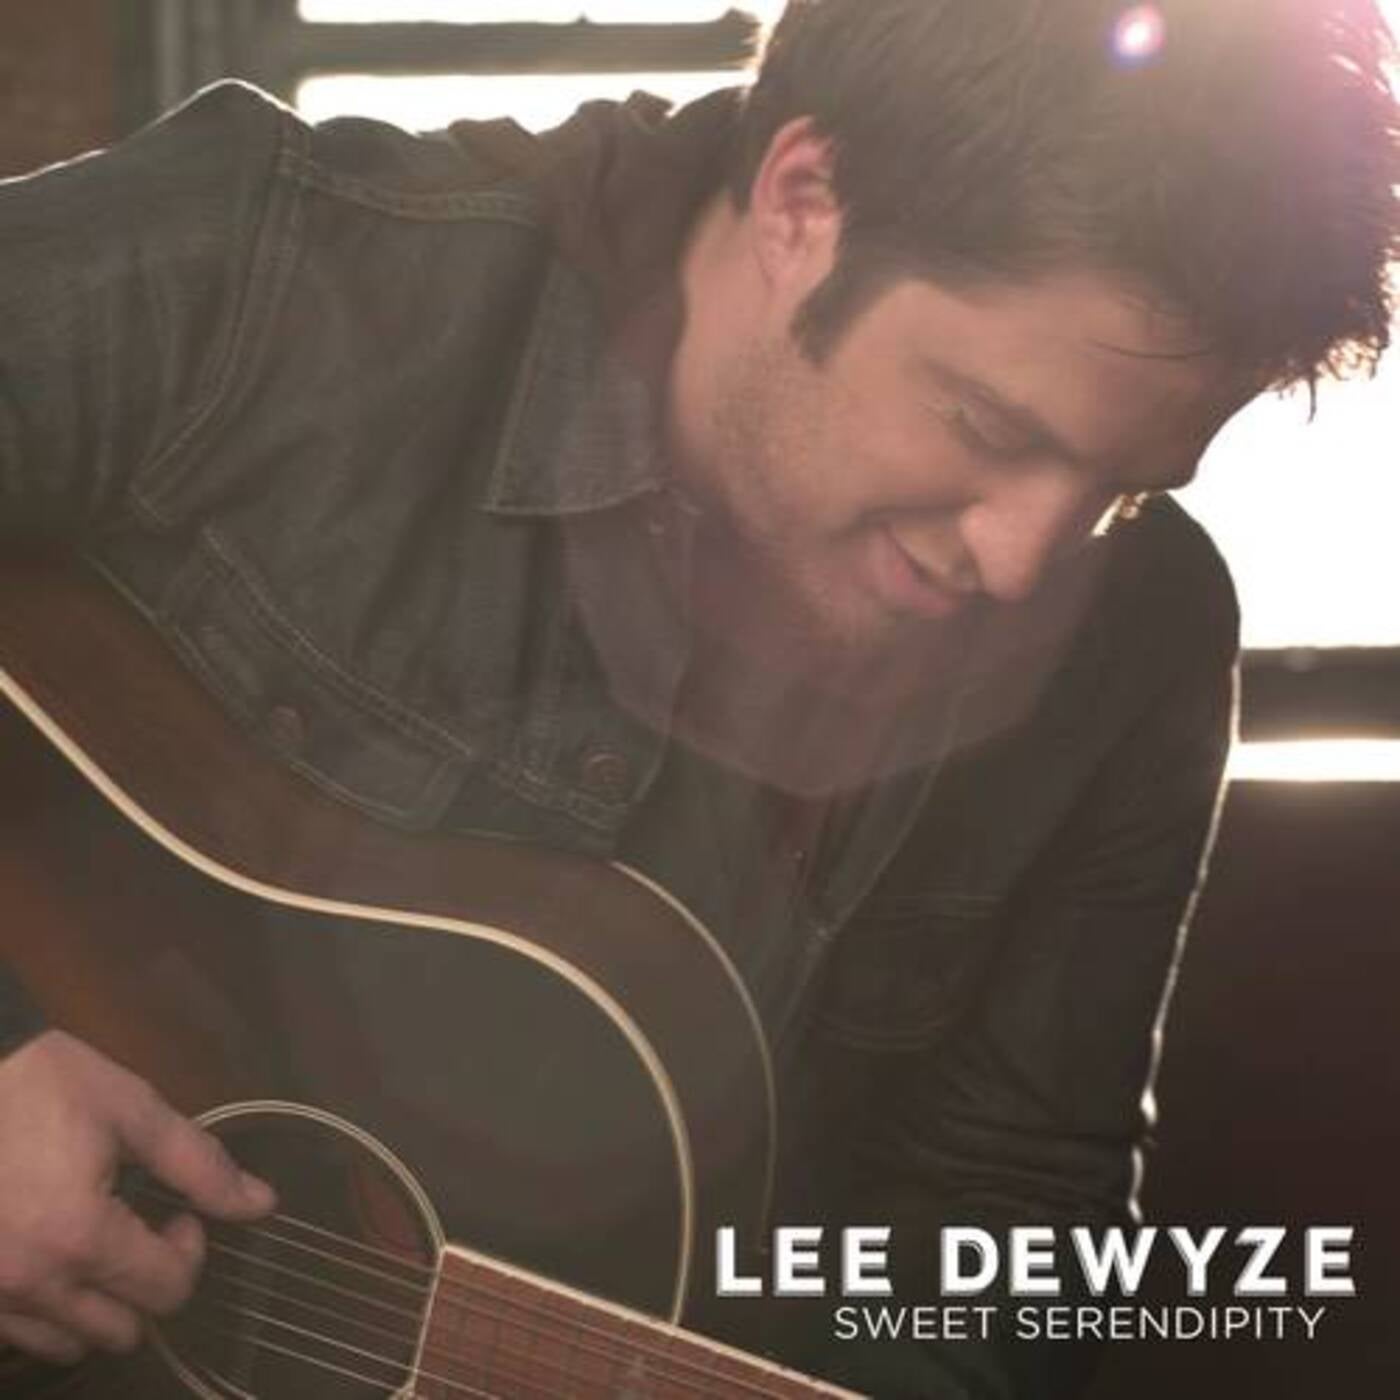 Sweet Serendipity by Lee DeWyze on Beatsource